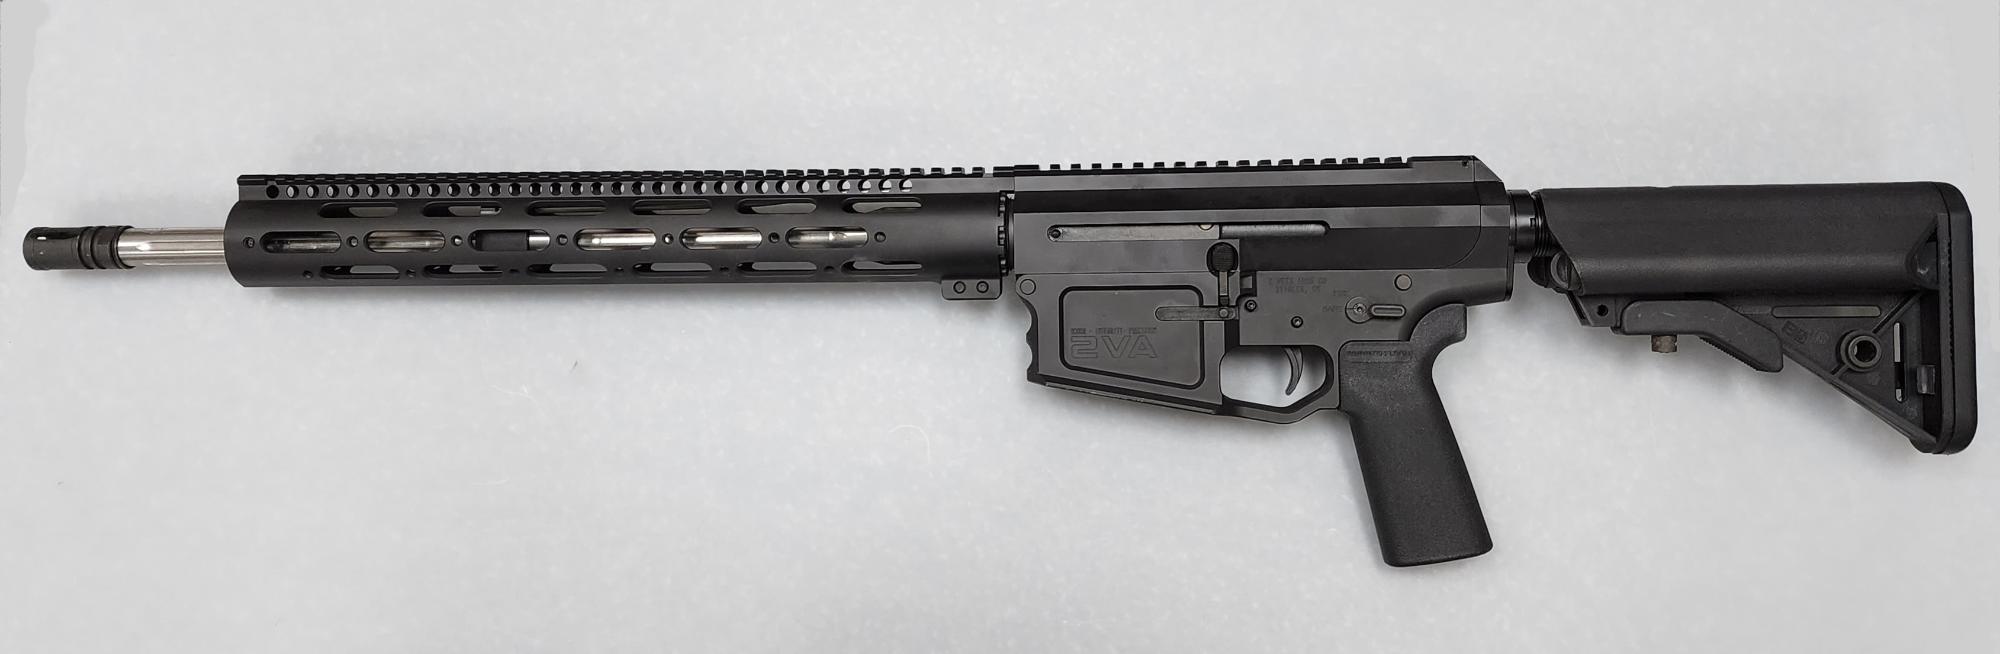 2 VETS ARMS CO 2VA-10 RIFLE 308WIN USED | 10007869